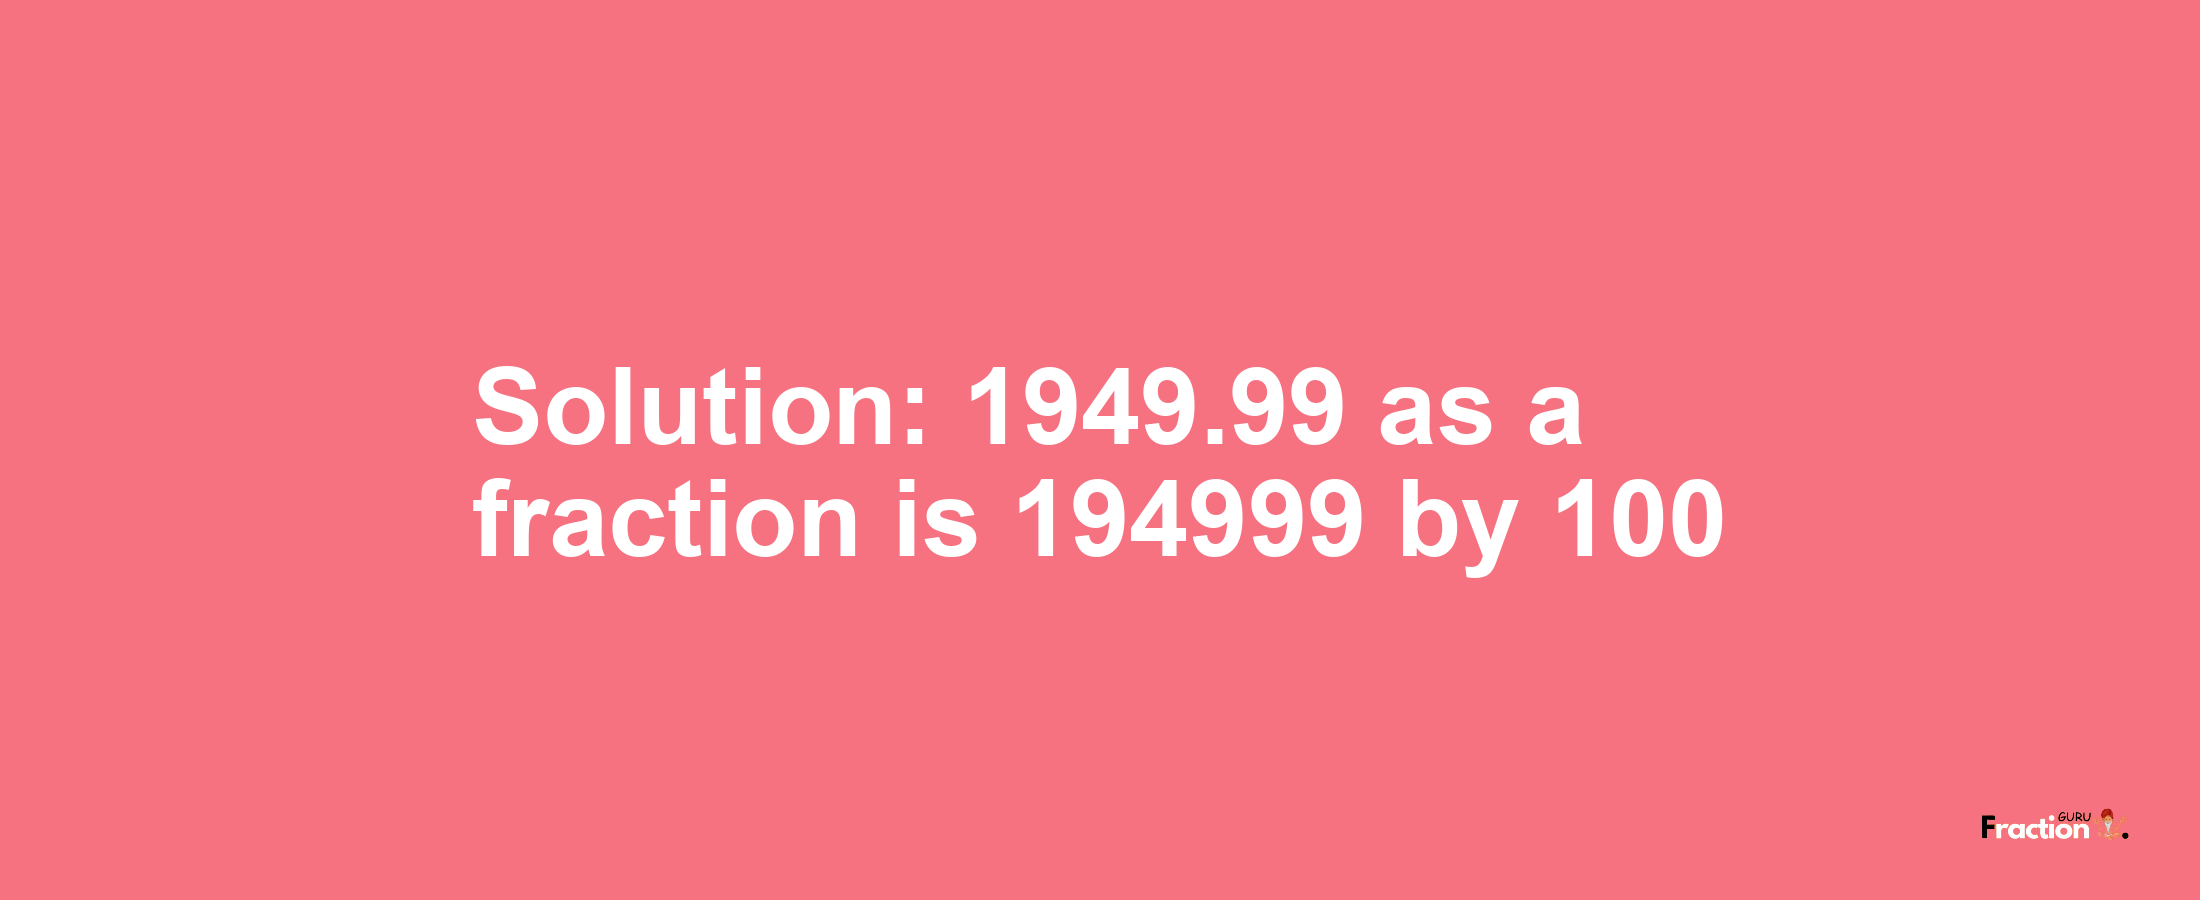 Solution:1949.99 as a fraction is 194999/100